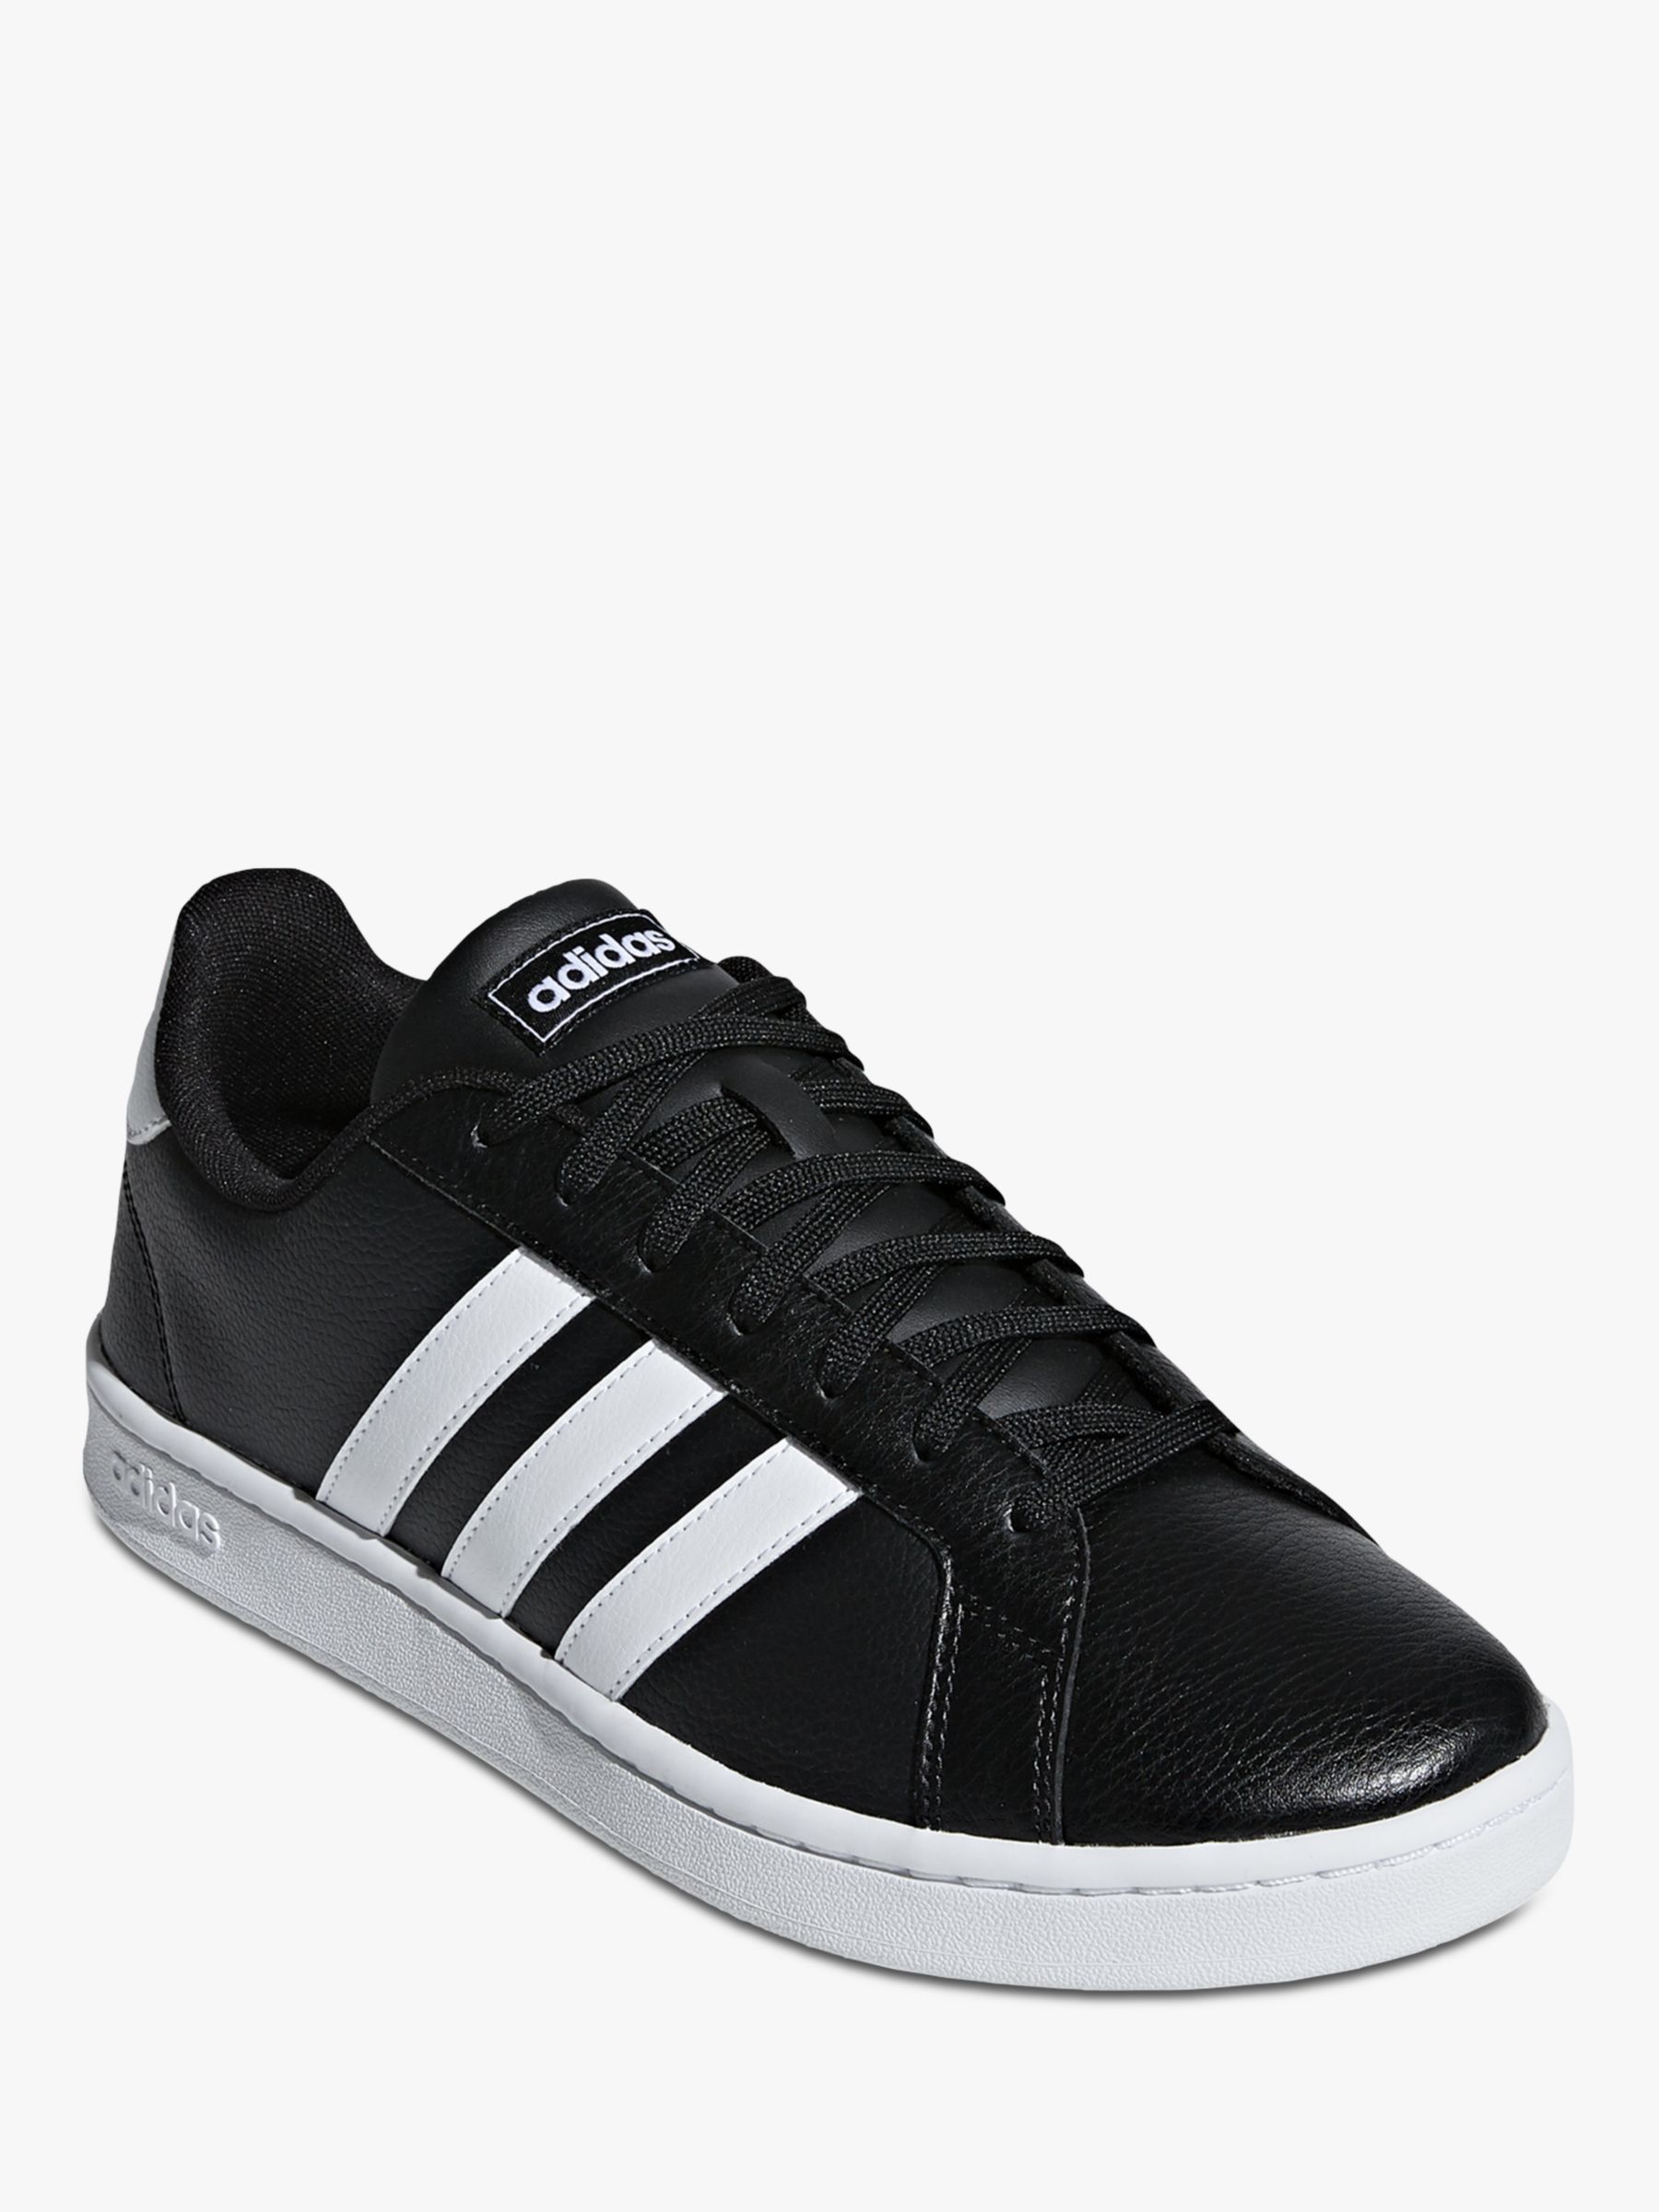 adidas Grand Court Trainers, White/Black at John Lewis & Partners